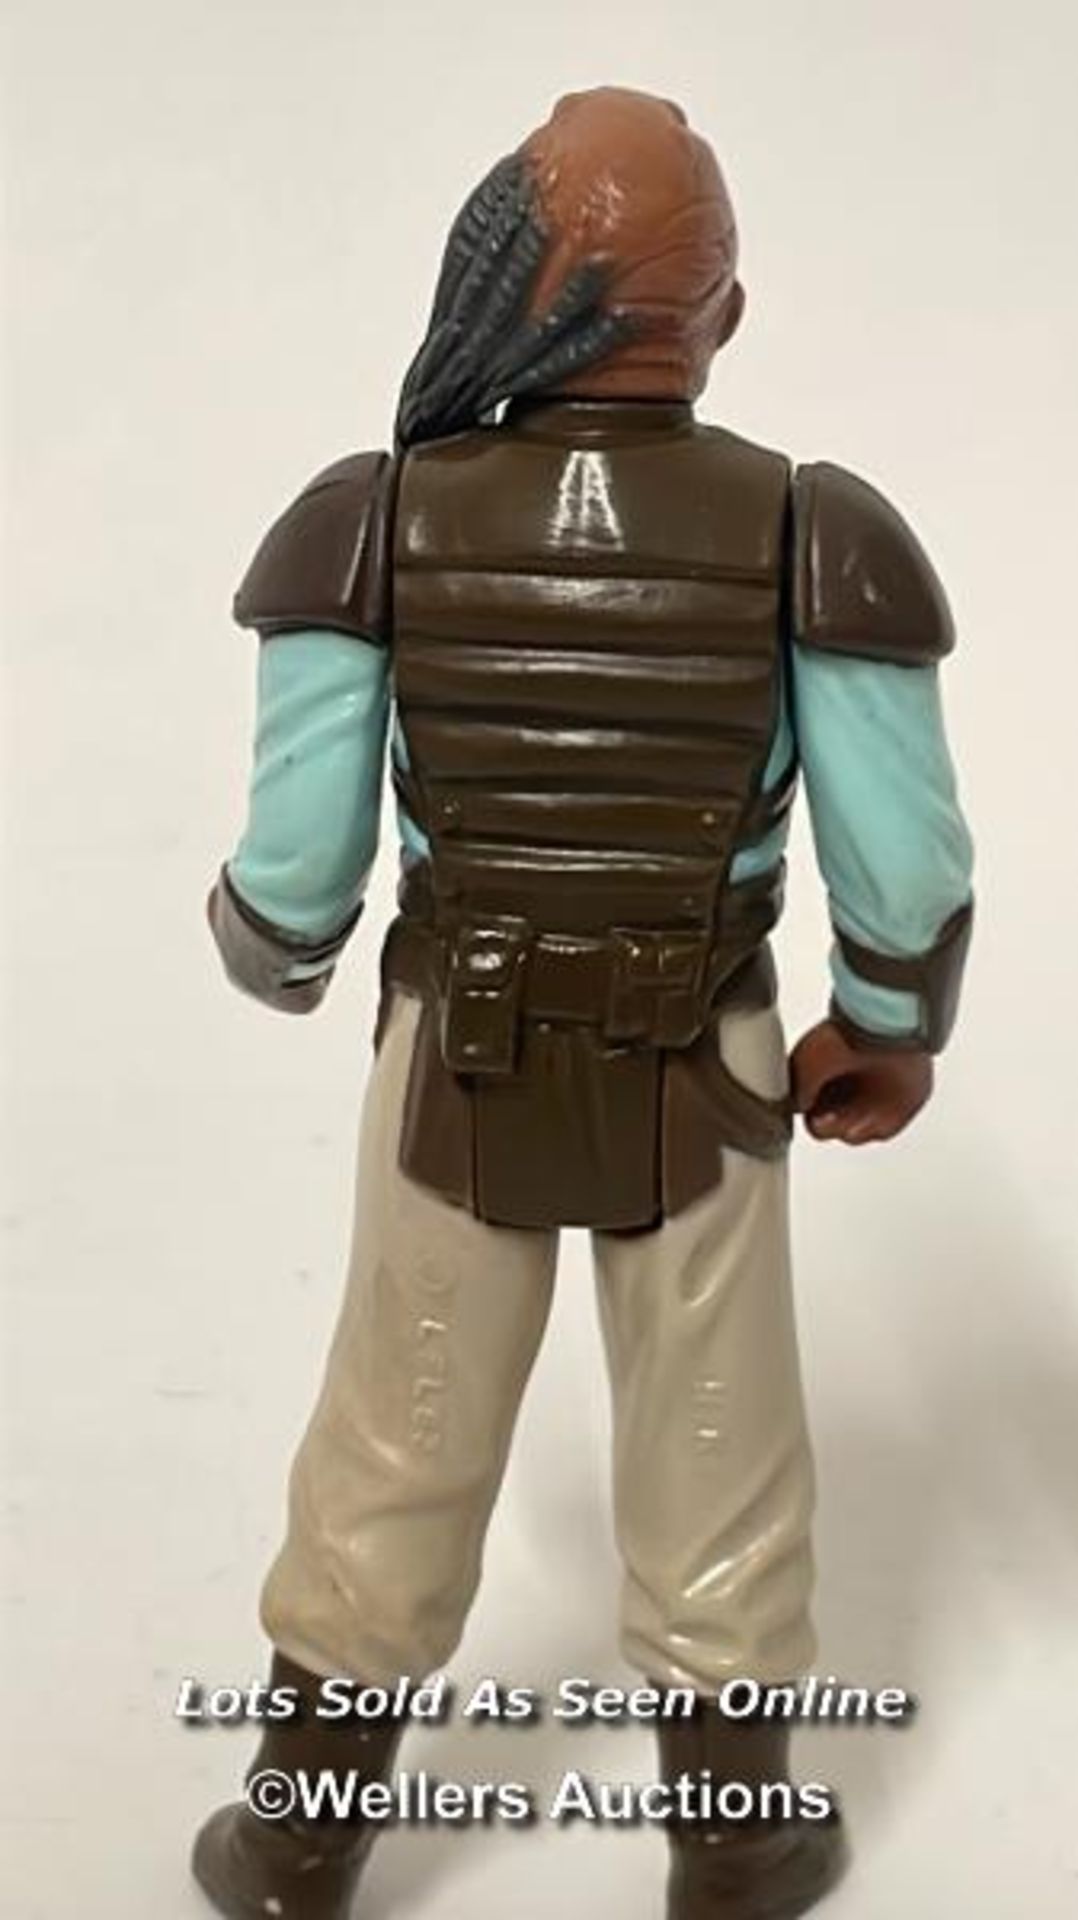 Vintage Star Wars Return of the Jedi lot including Princess Leia - Boushh, LFL 1983 (NO COO) with - Image 15 of 15